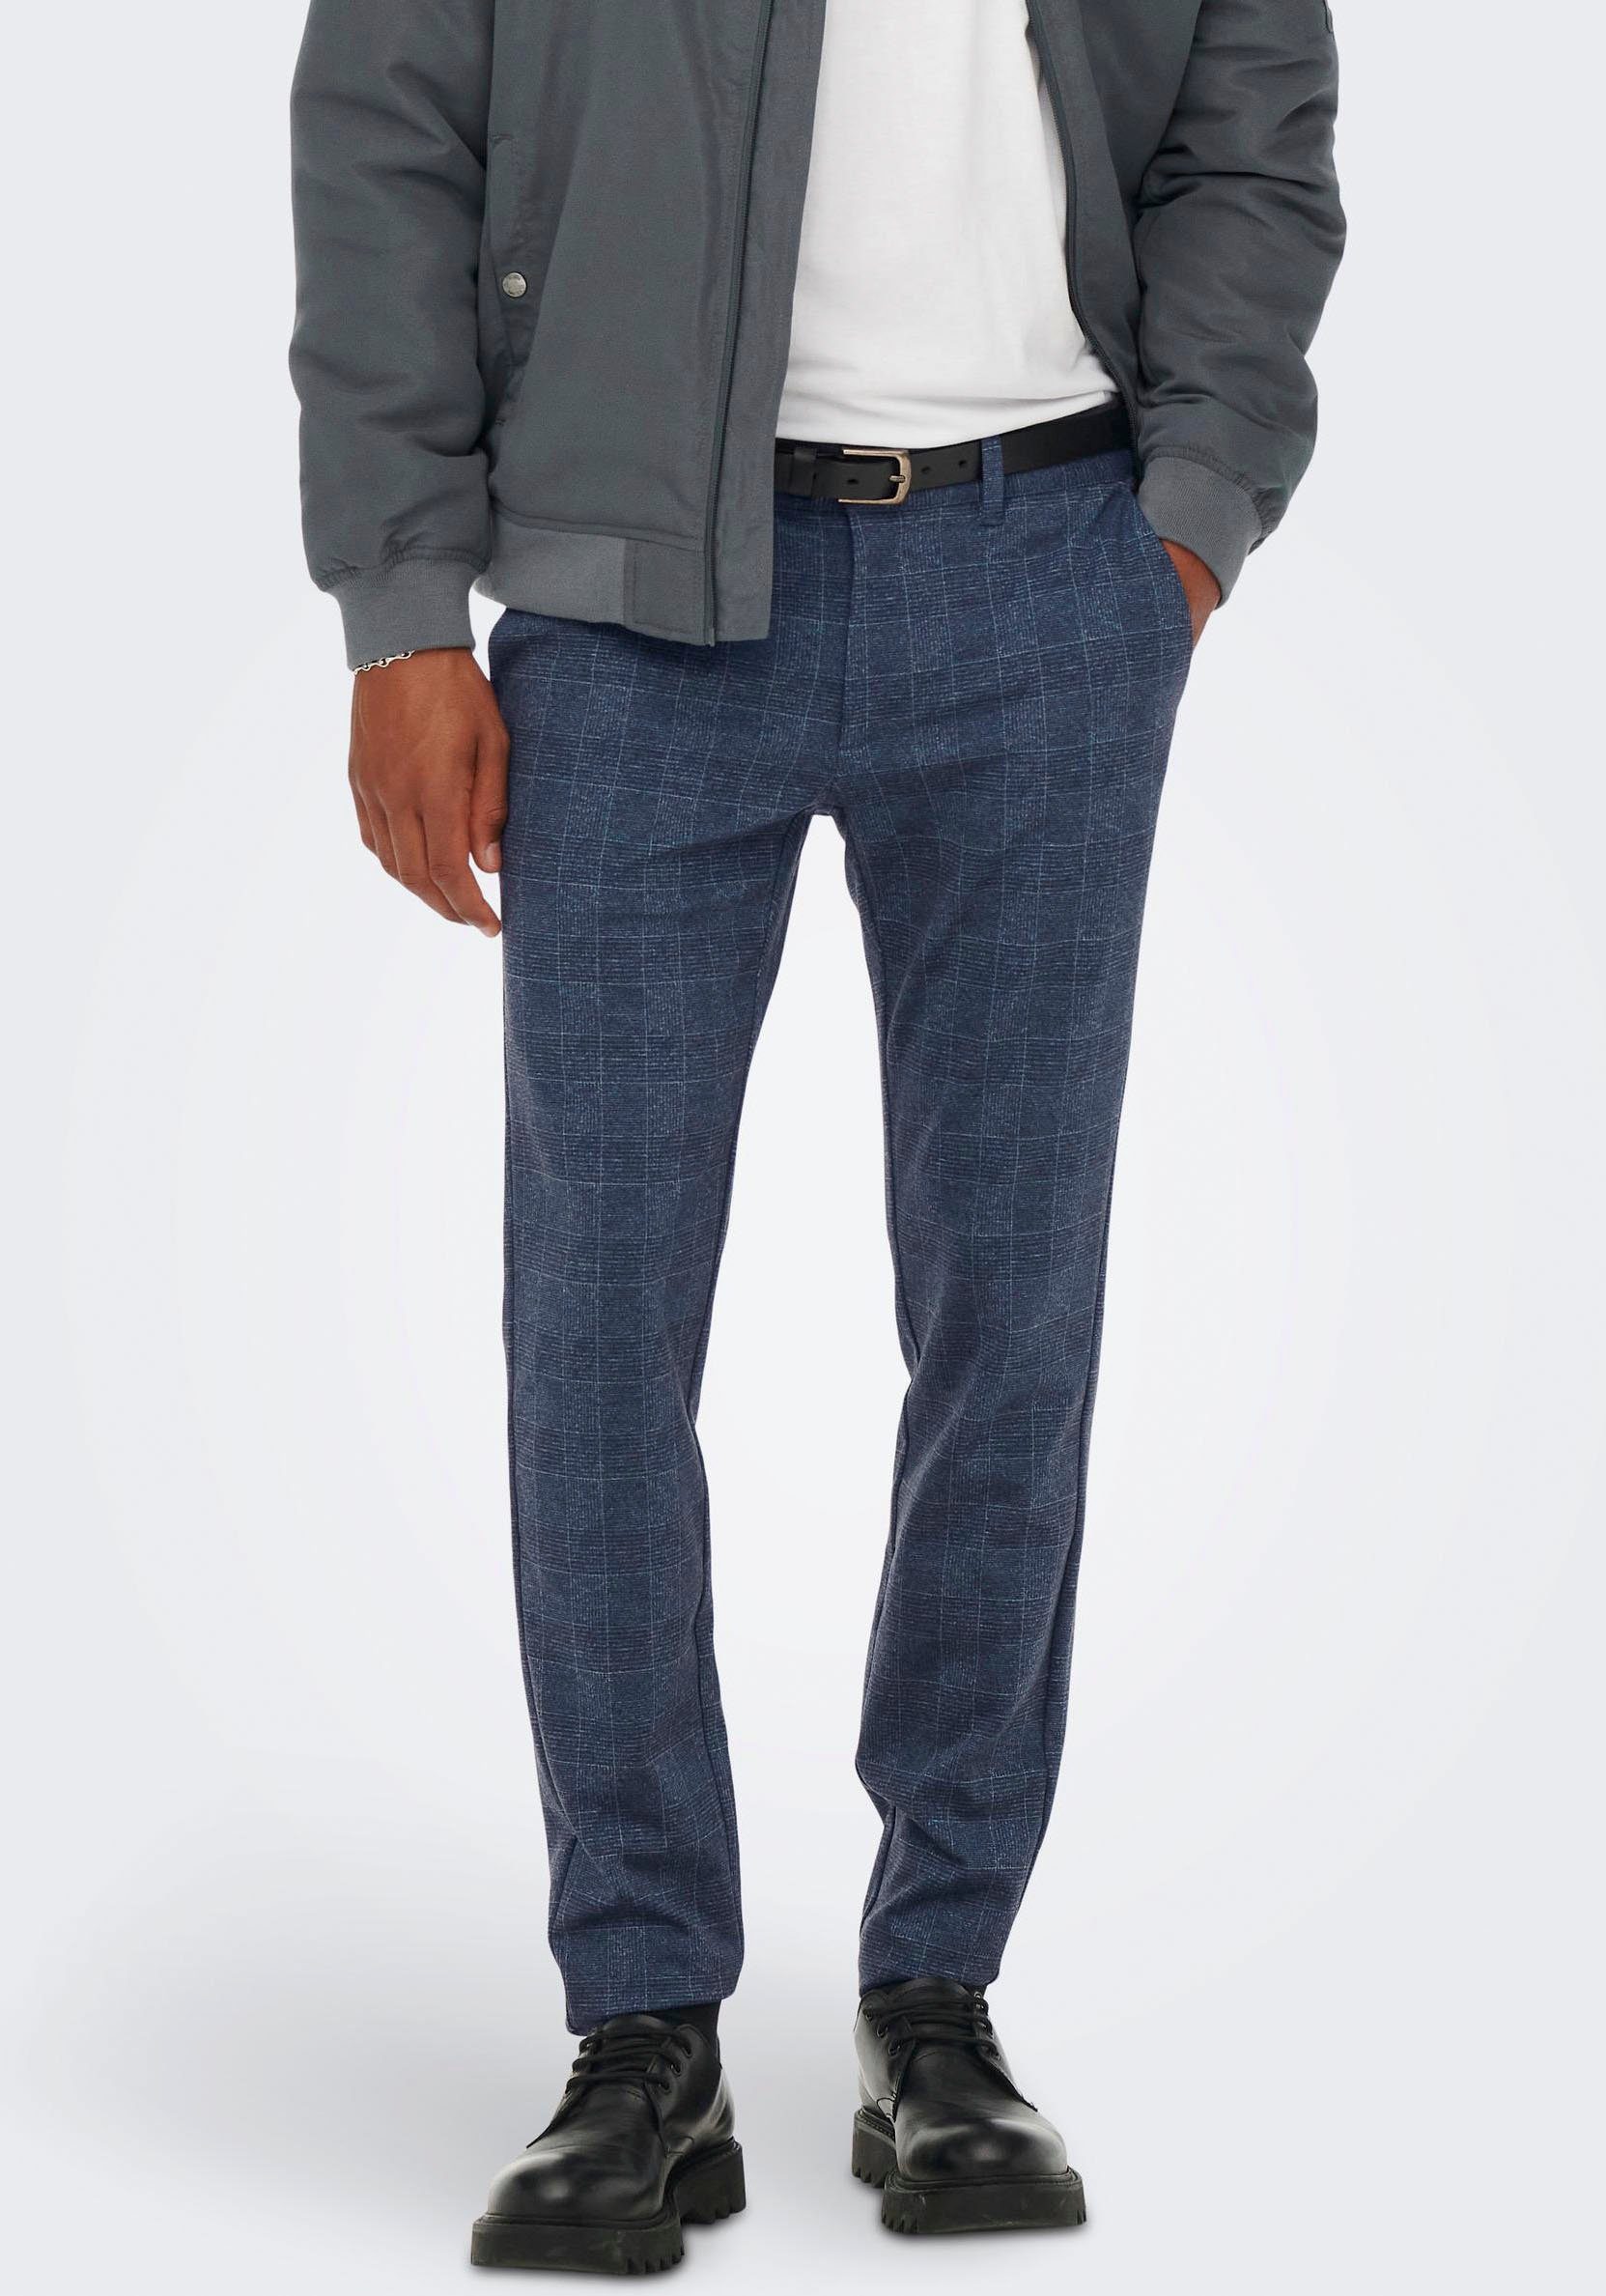 ONLY & SONS Chinohose MARK CHECK PANTS blau kariert